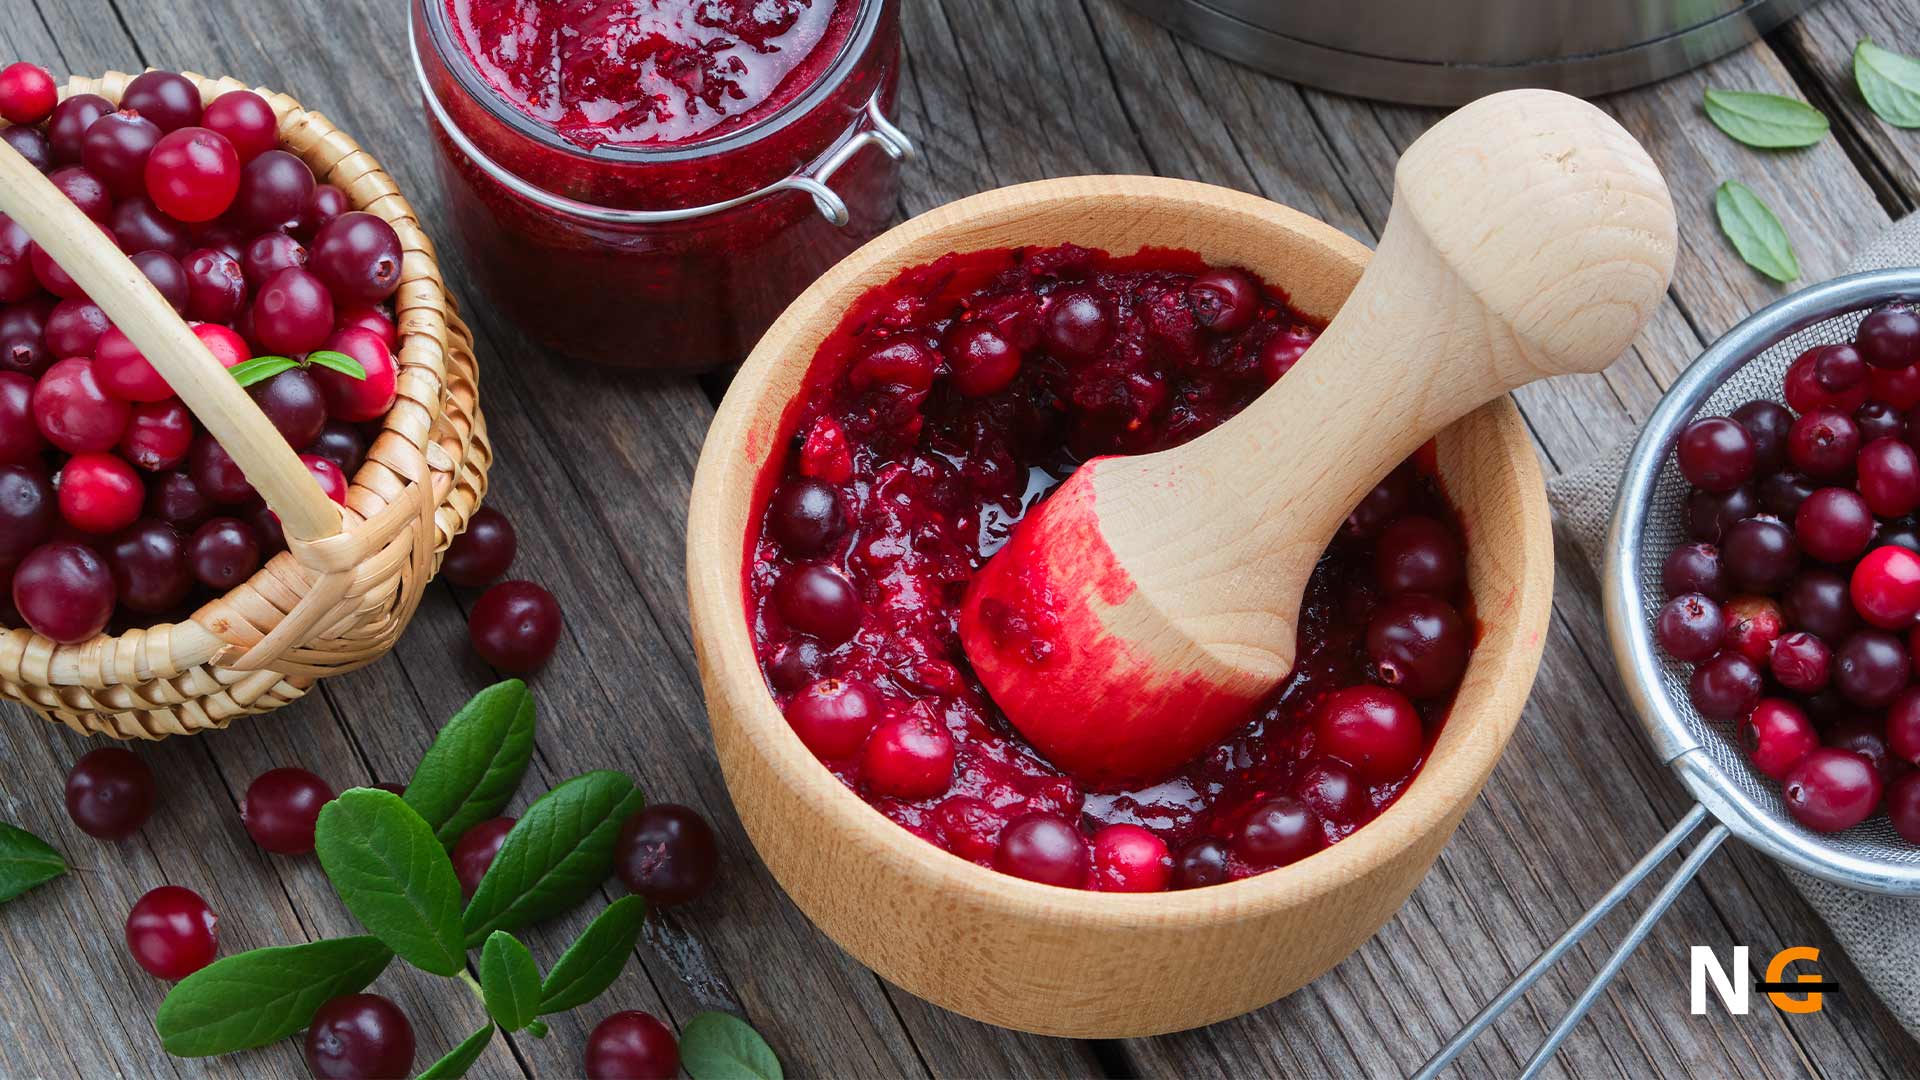 How Is Cranberry Sauce Made